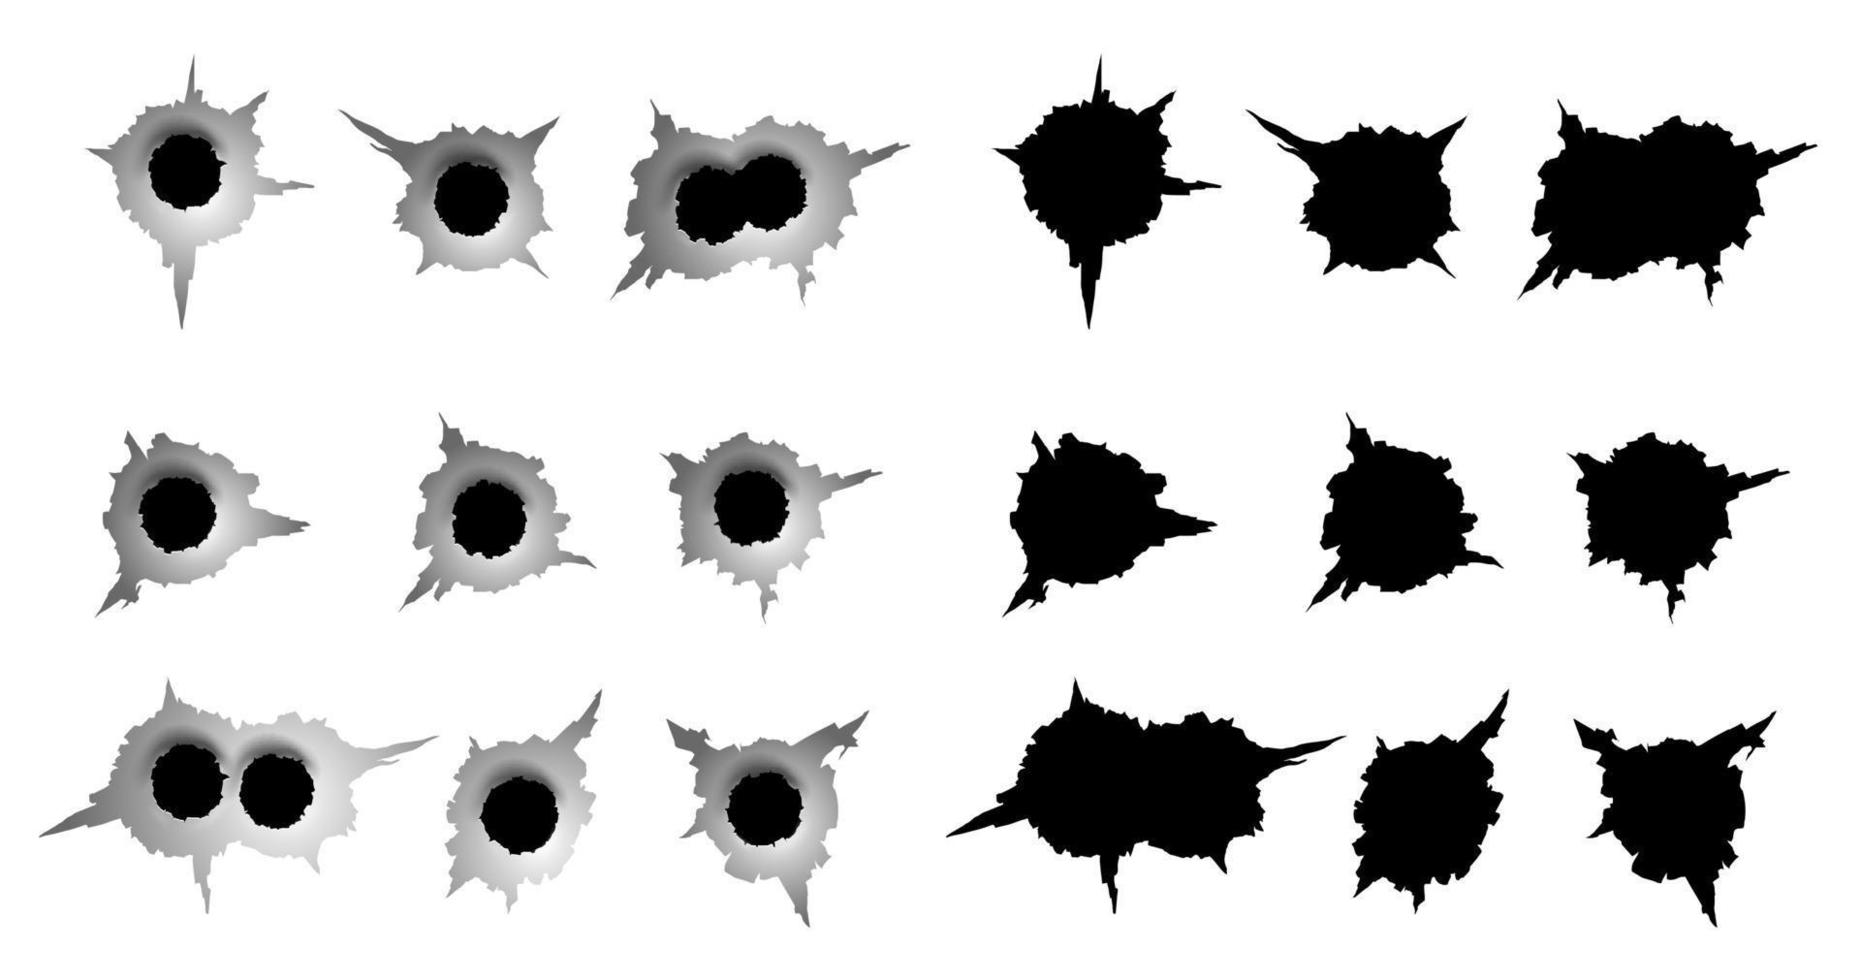 set of bullet holes. different damaged element from bullet on metallic surface. vector illustration